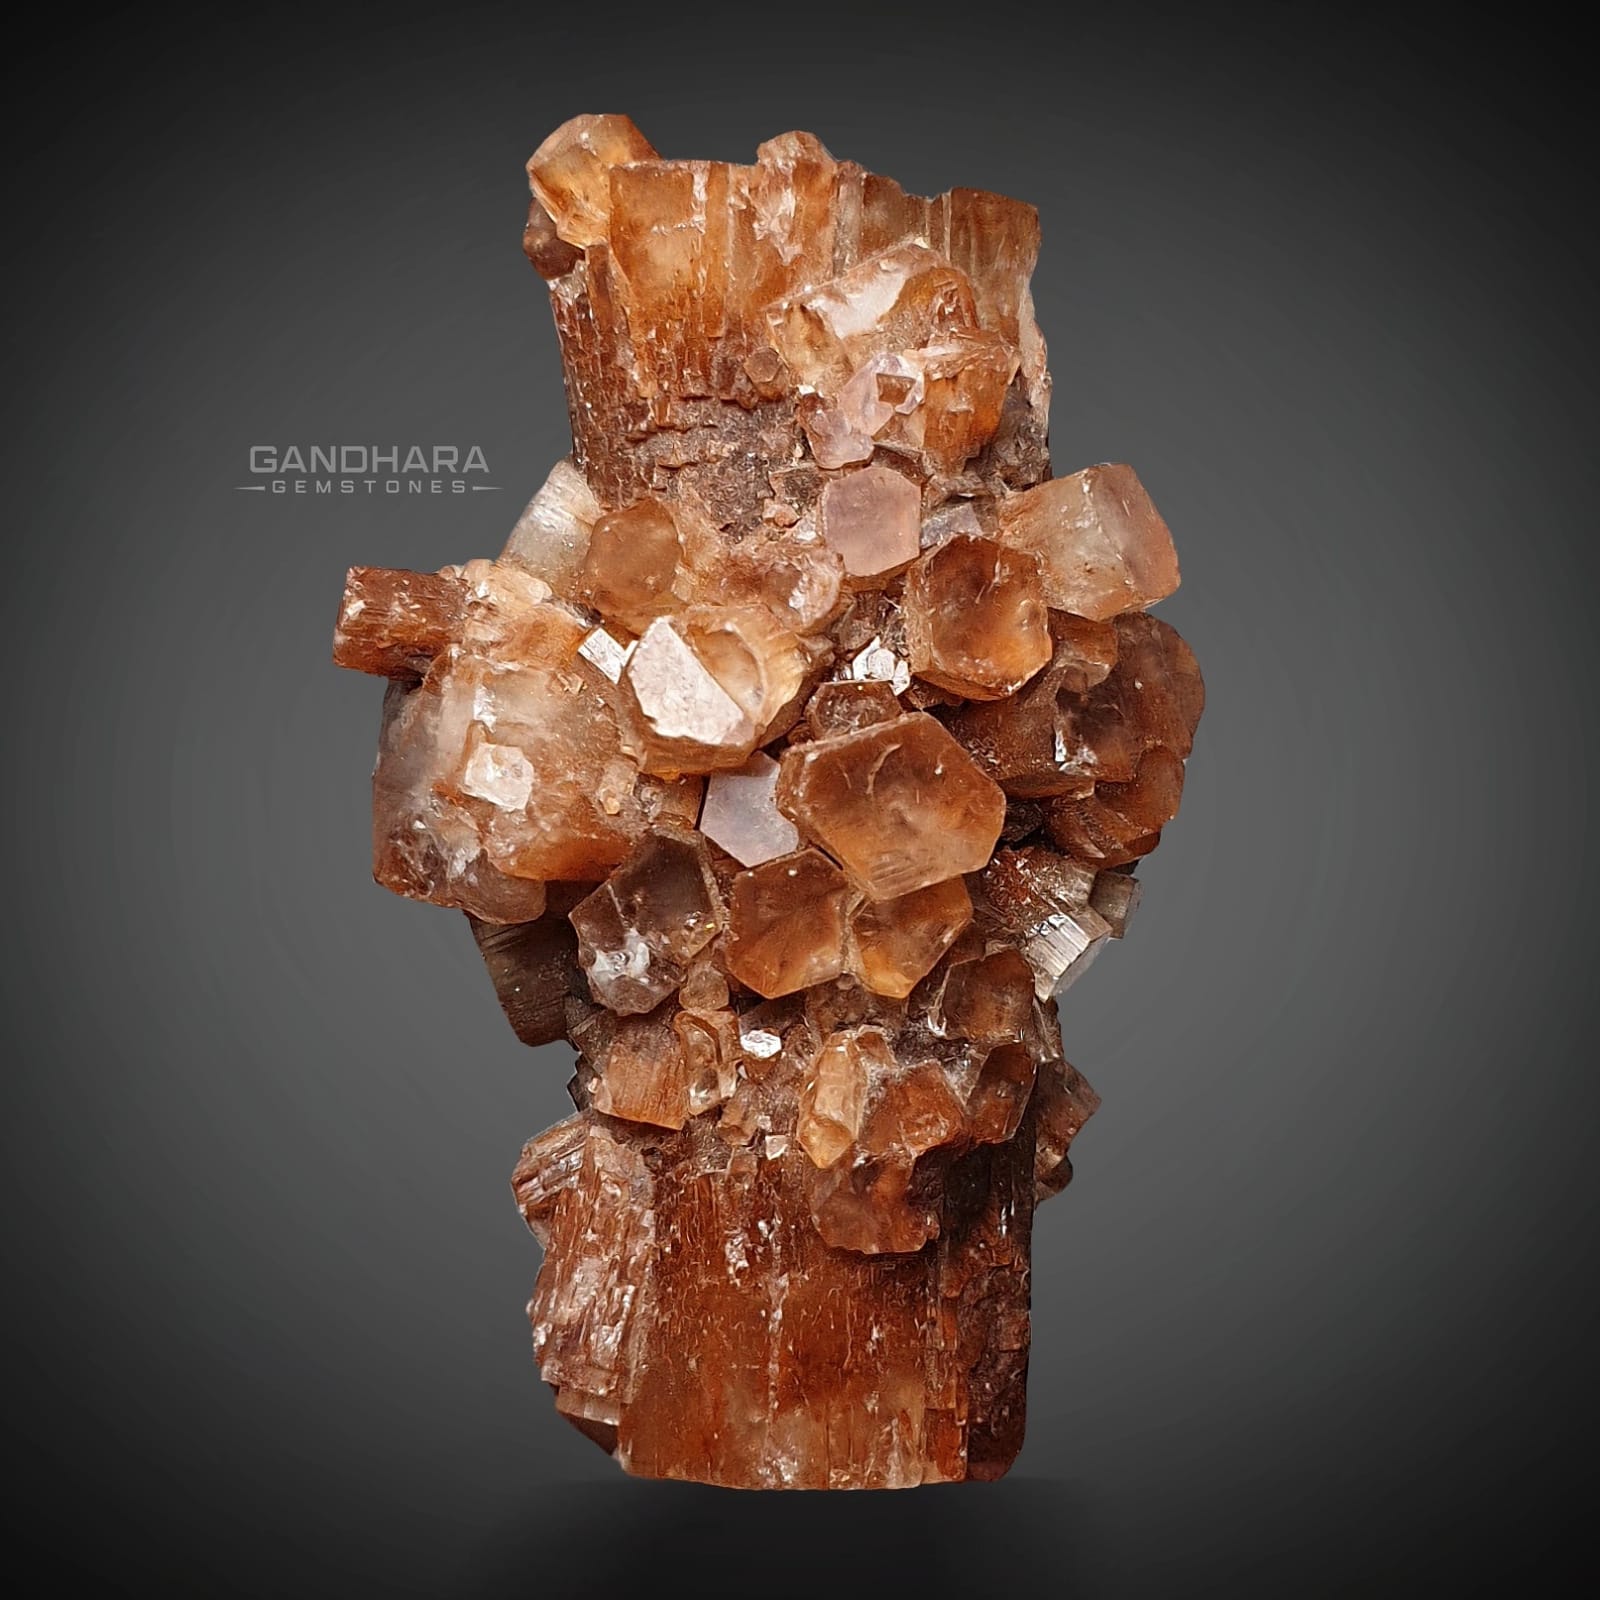 Robust Aragonite Crystal Cluster with Iron Oxide Coating